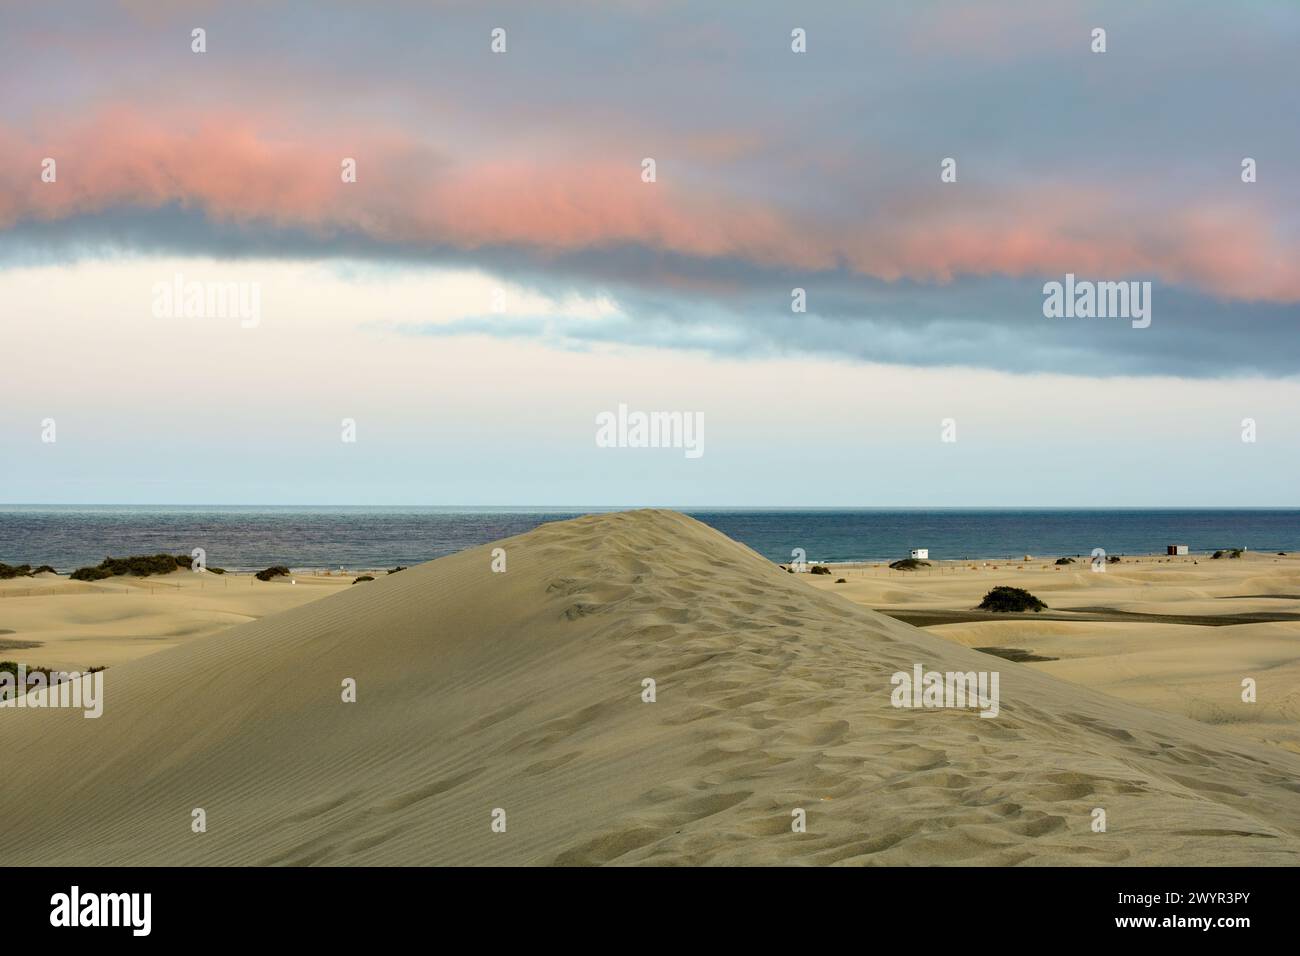 In the dunes of Maspalomas on Gran Canaria in Spain. View of the sea in the evening light with clouds and blue sky. The huge sand dunes resemble a sma Stock Photo